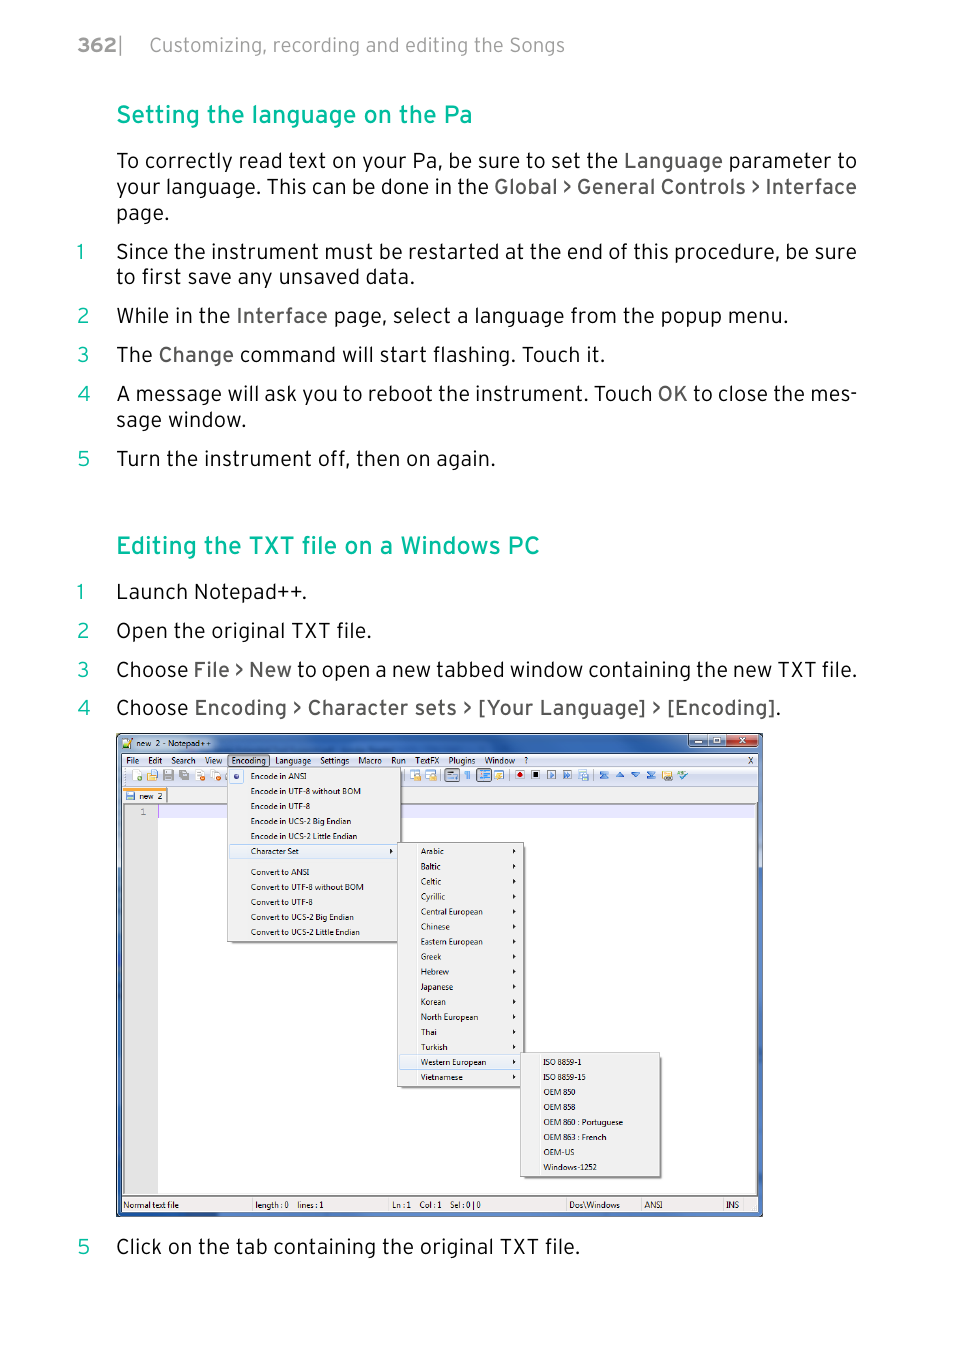 Setting the language on the pa, Editing the txt file on a windows pc | KORG  PA4X 76 User Manual | Page 366 / 1074 | Original mode